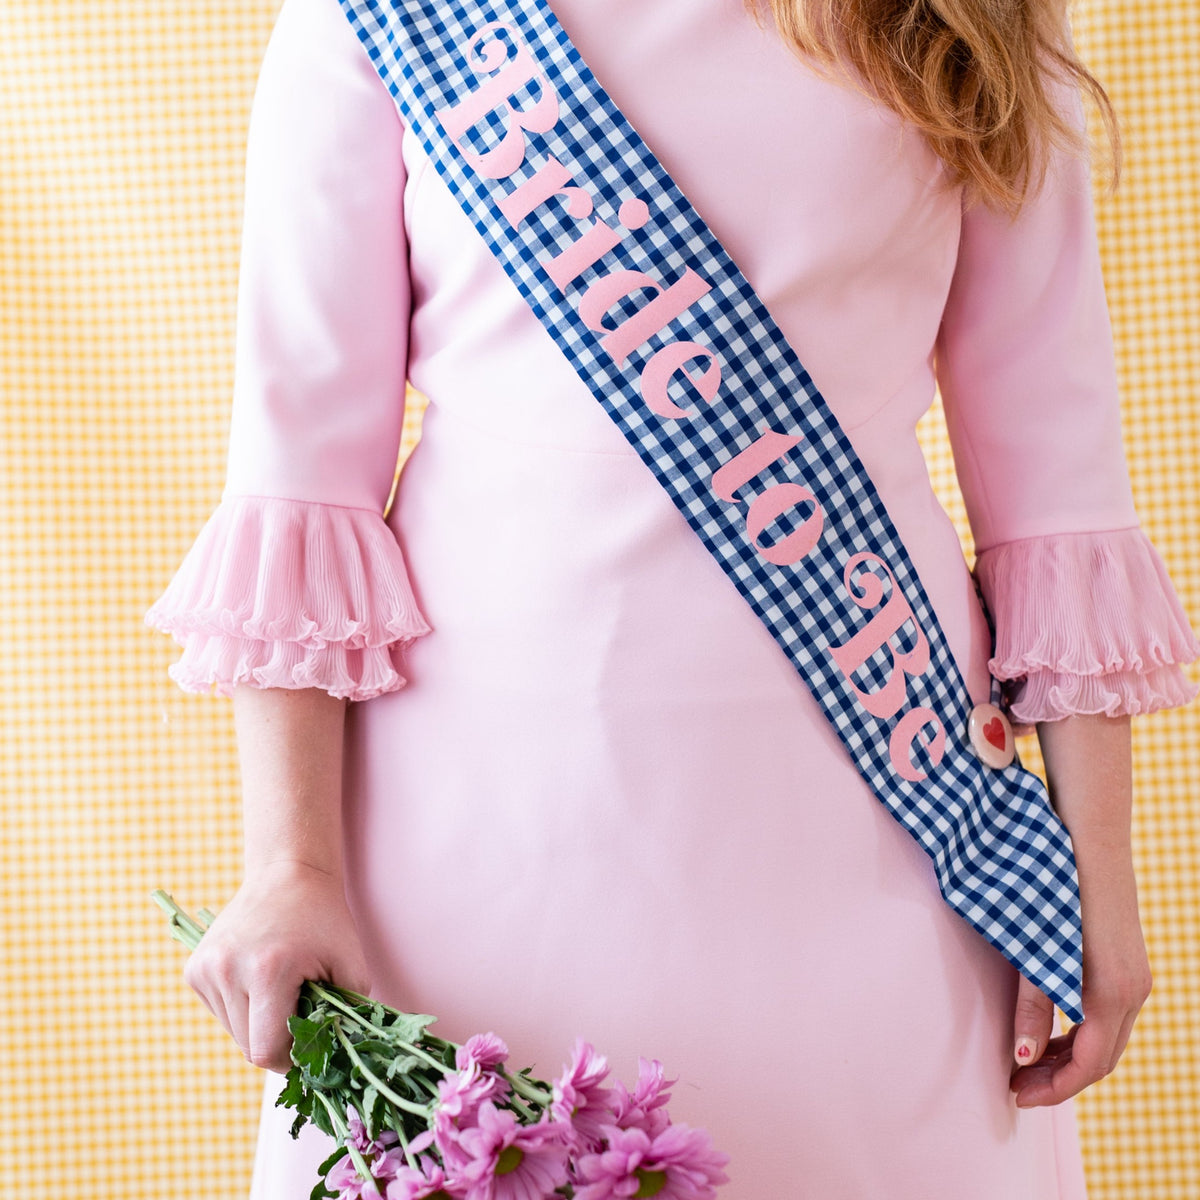 Limited Edition Blue Gingham + Pink 'Bride to Be' Hen Party Sash